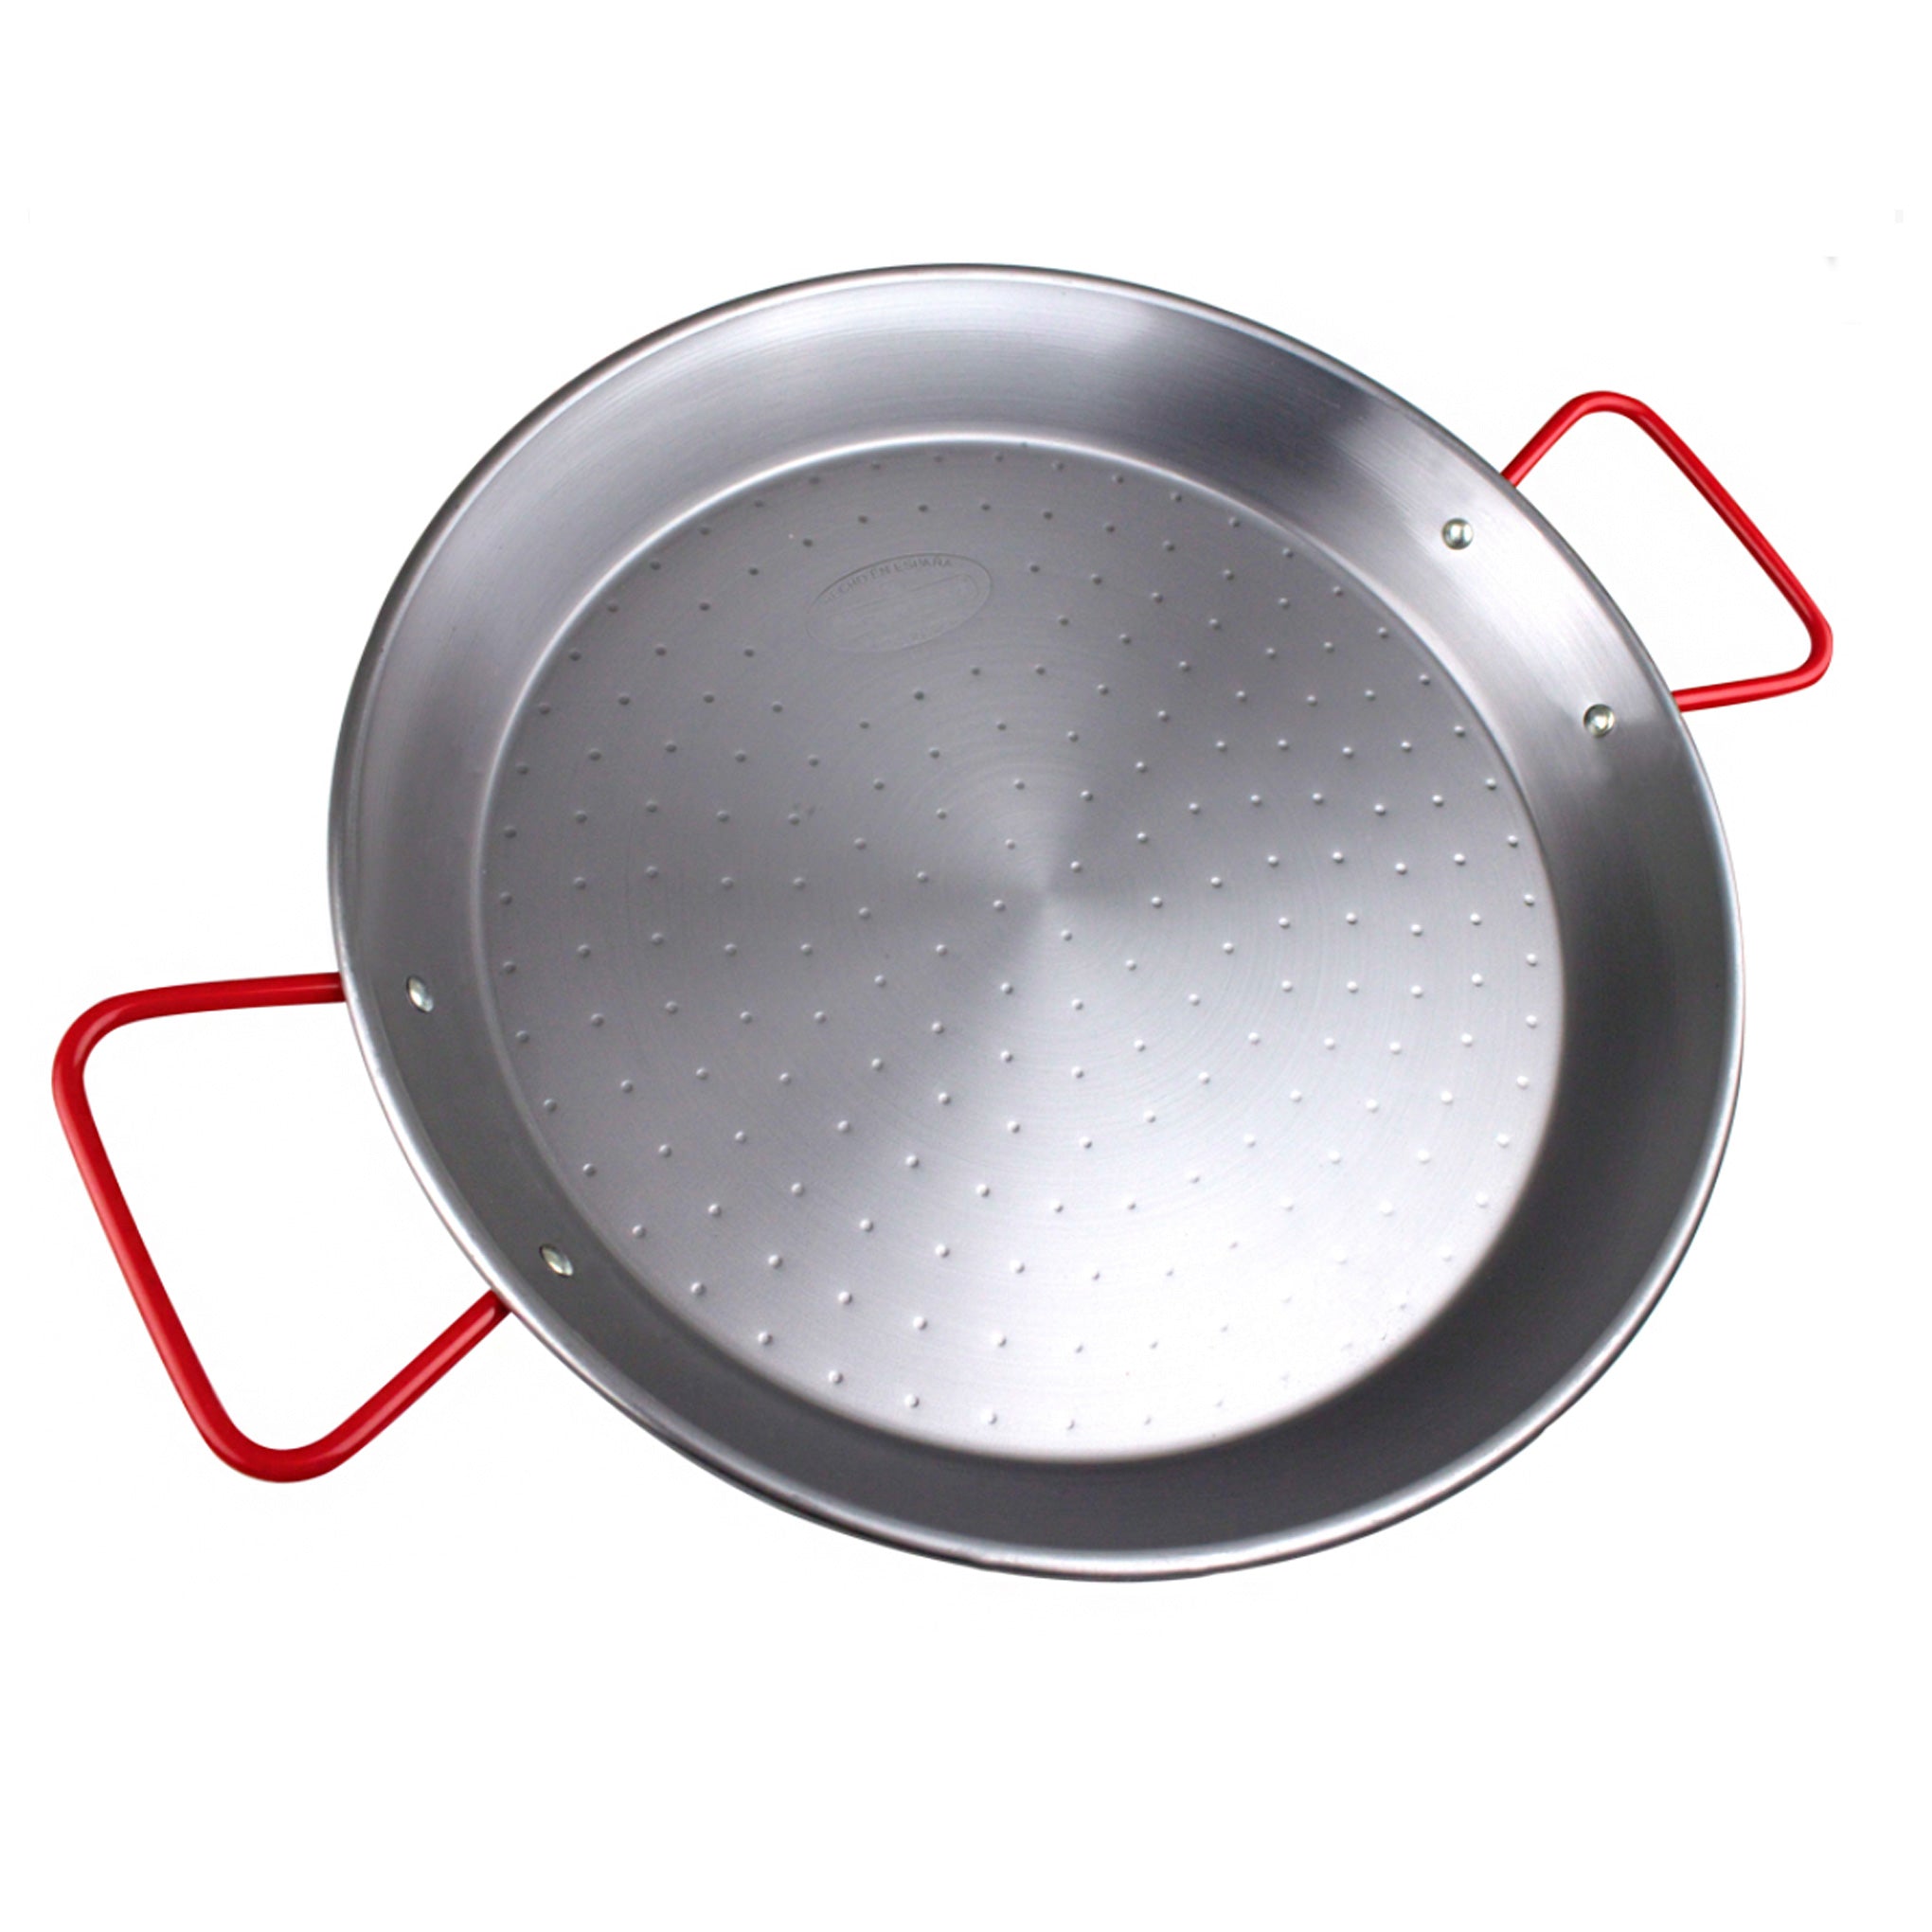 16 inch Carbon Steel Paella Pan with Red Handles from Spain (40 cm)